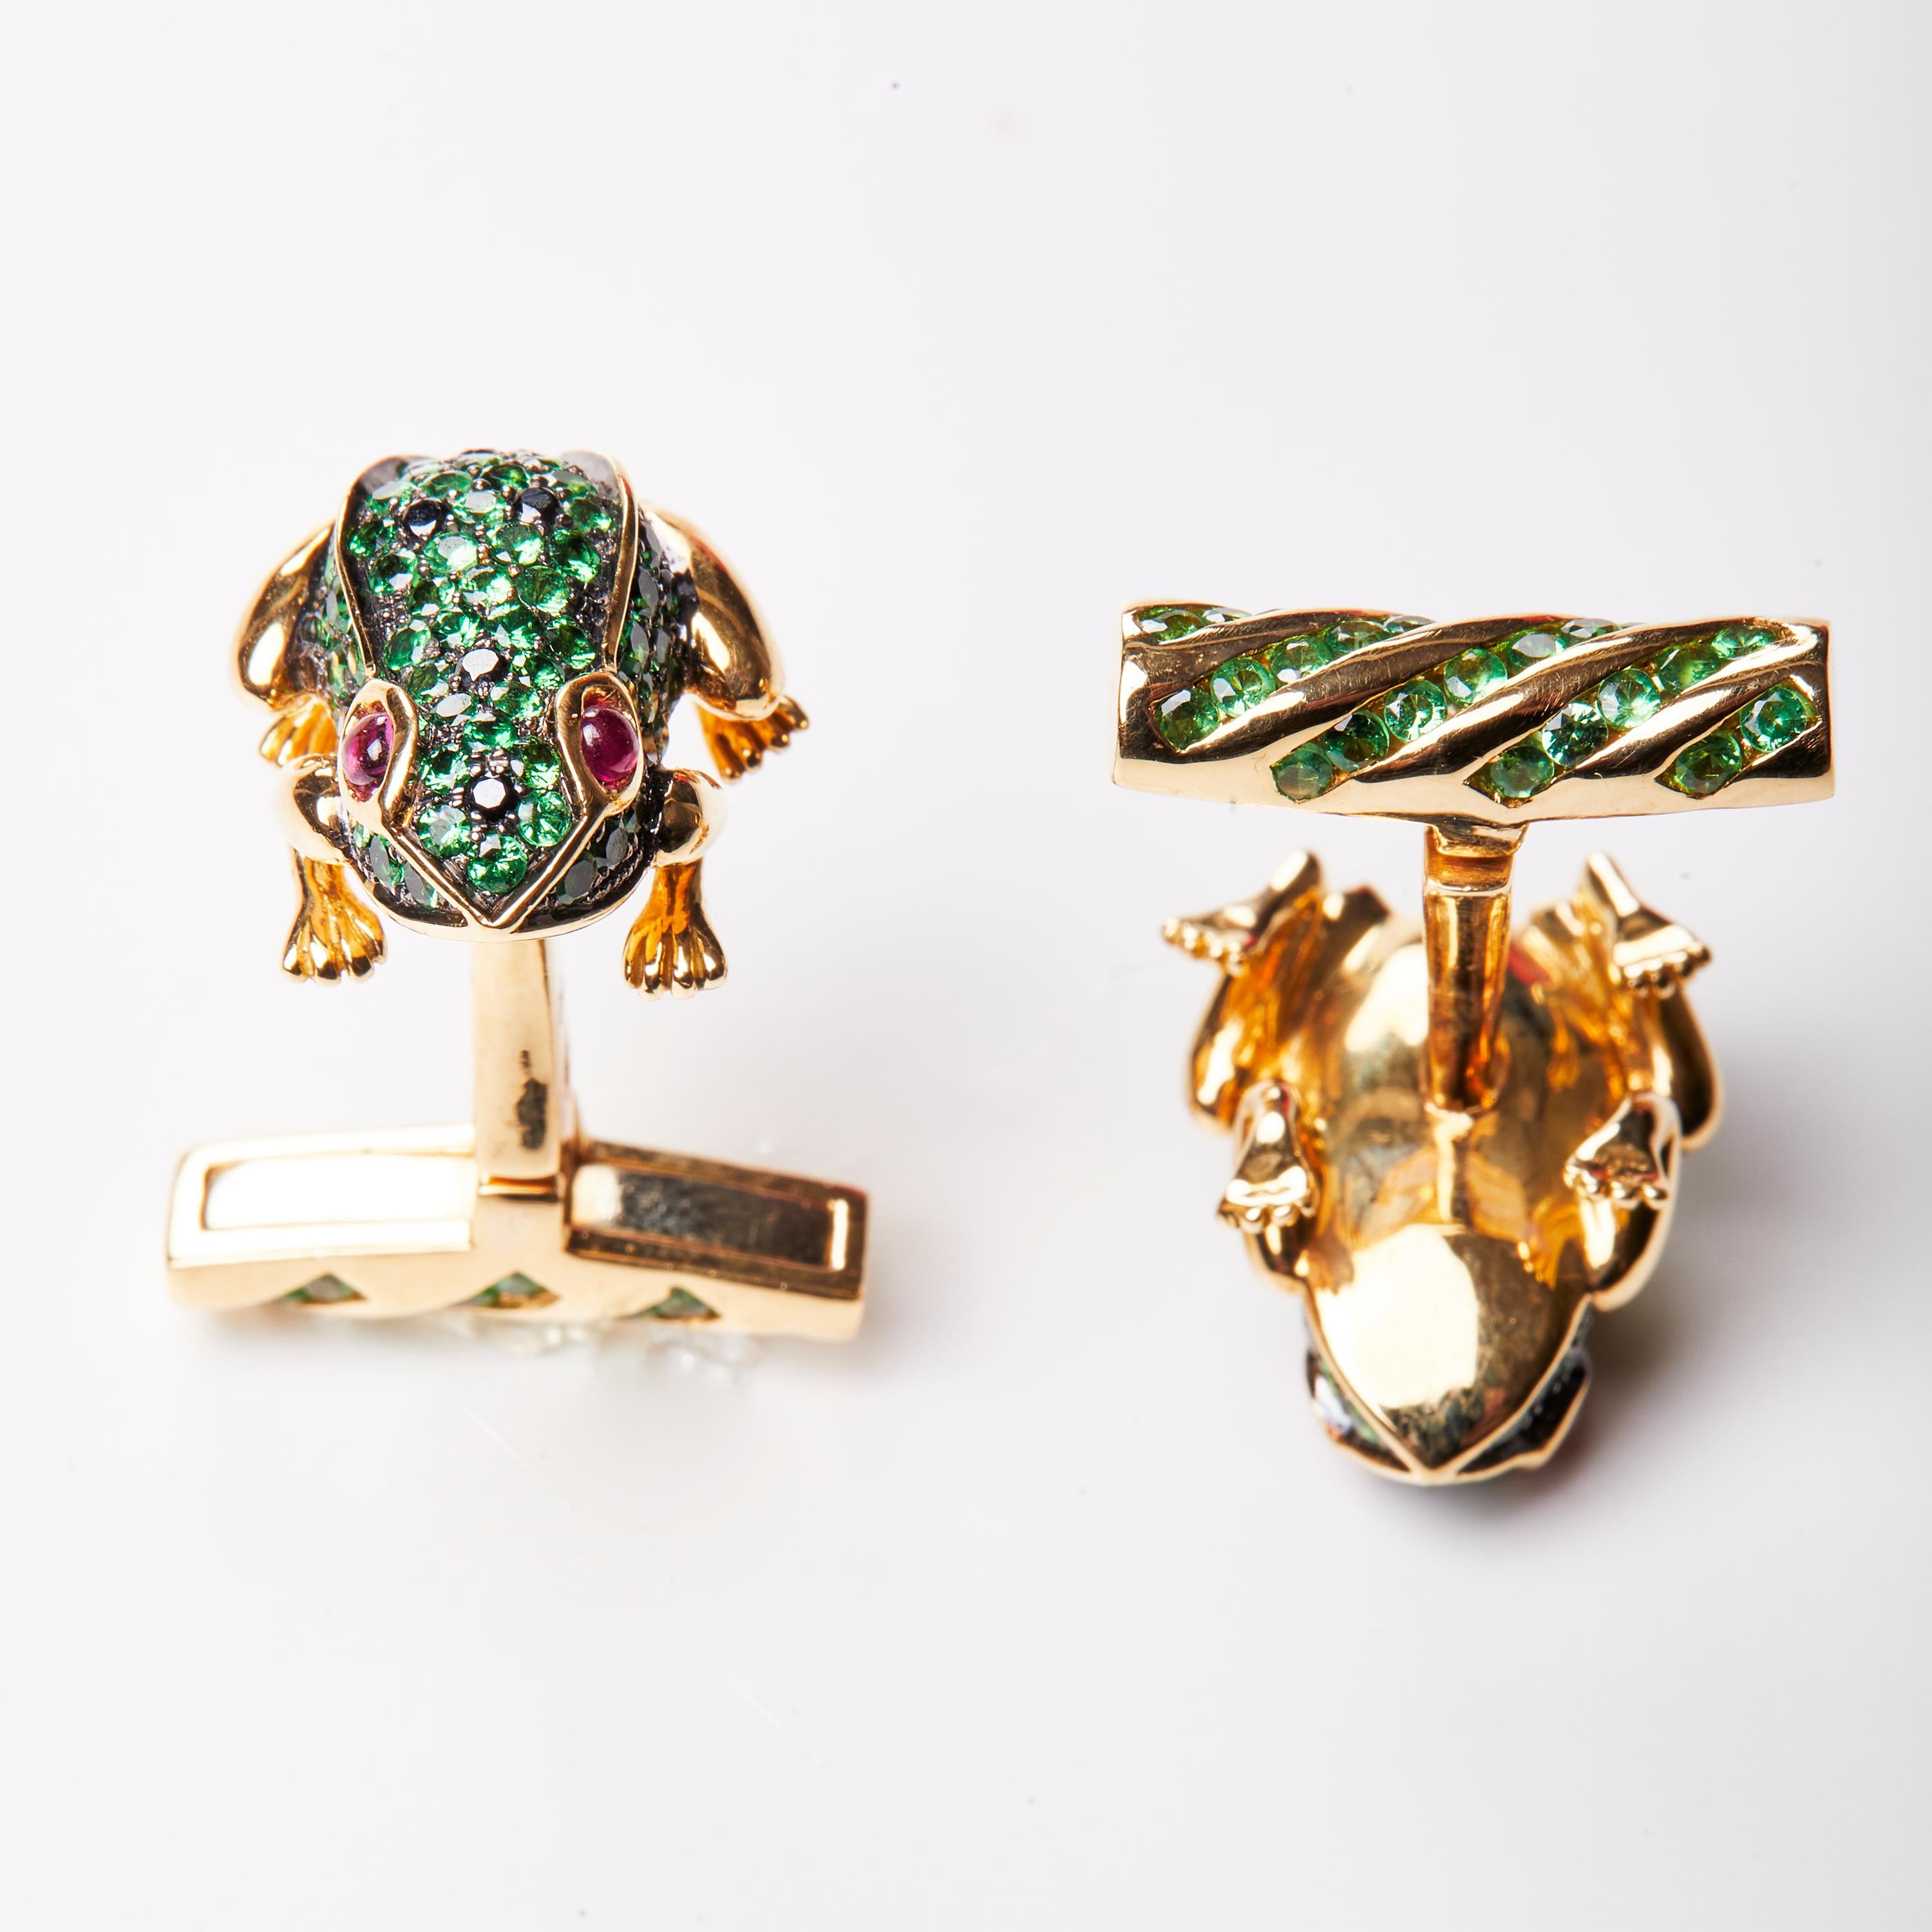 A unique pair of 18 Karat Yellow Gold and multi- coloured stone cufflinks. The cufflinks feature a frog shaped pavé set with coloured stones consisting of Tsavorite, Black Diamonds and cabochon cut Ruby. These striking cufflinks are made to emulate